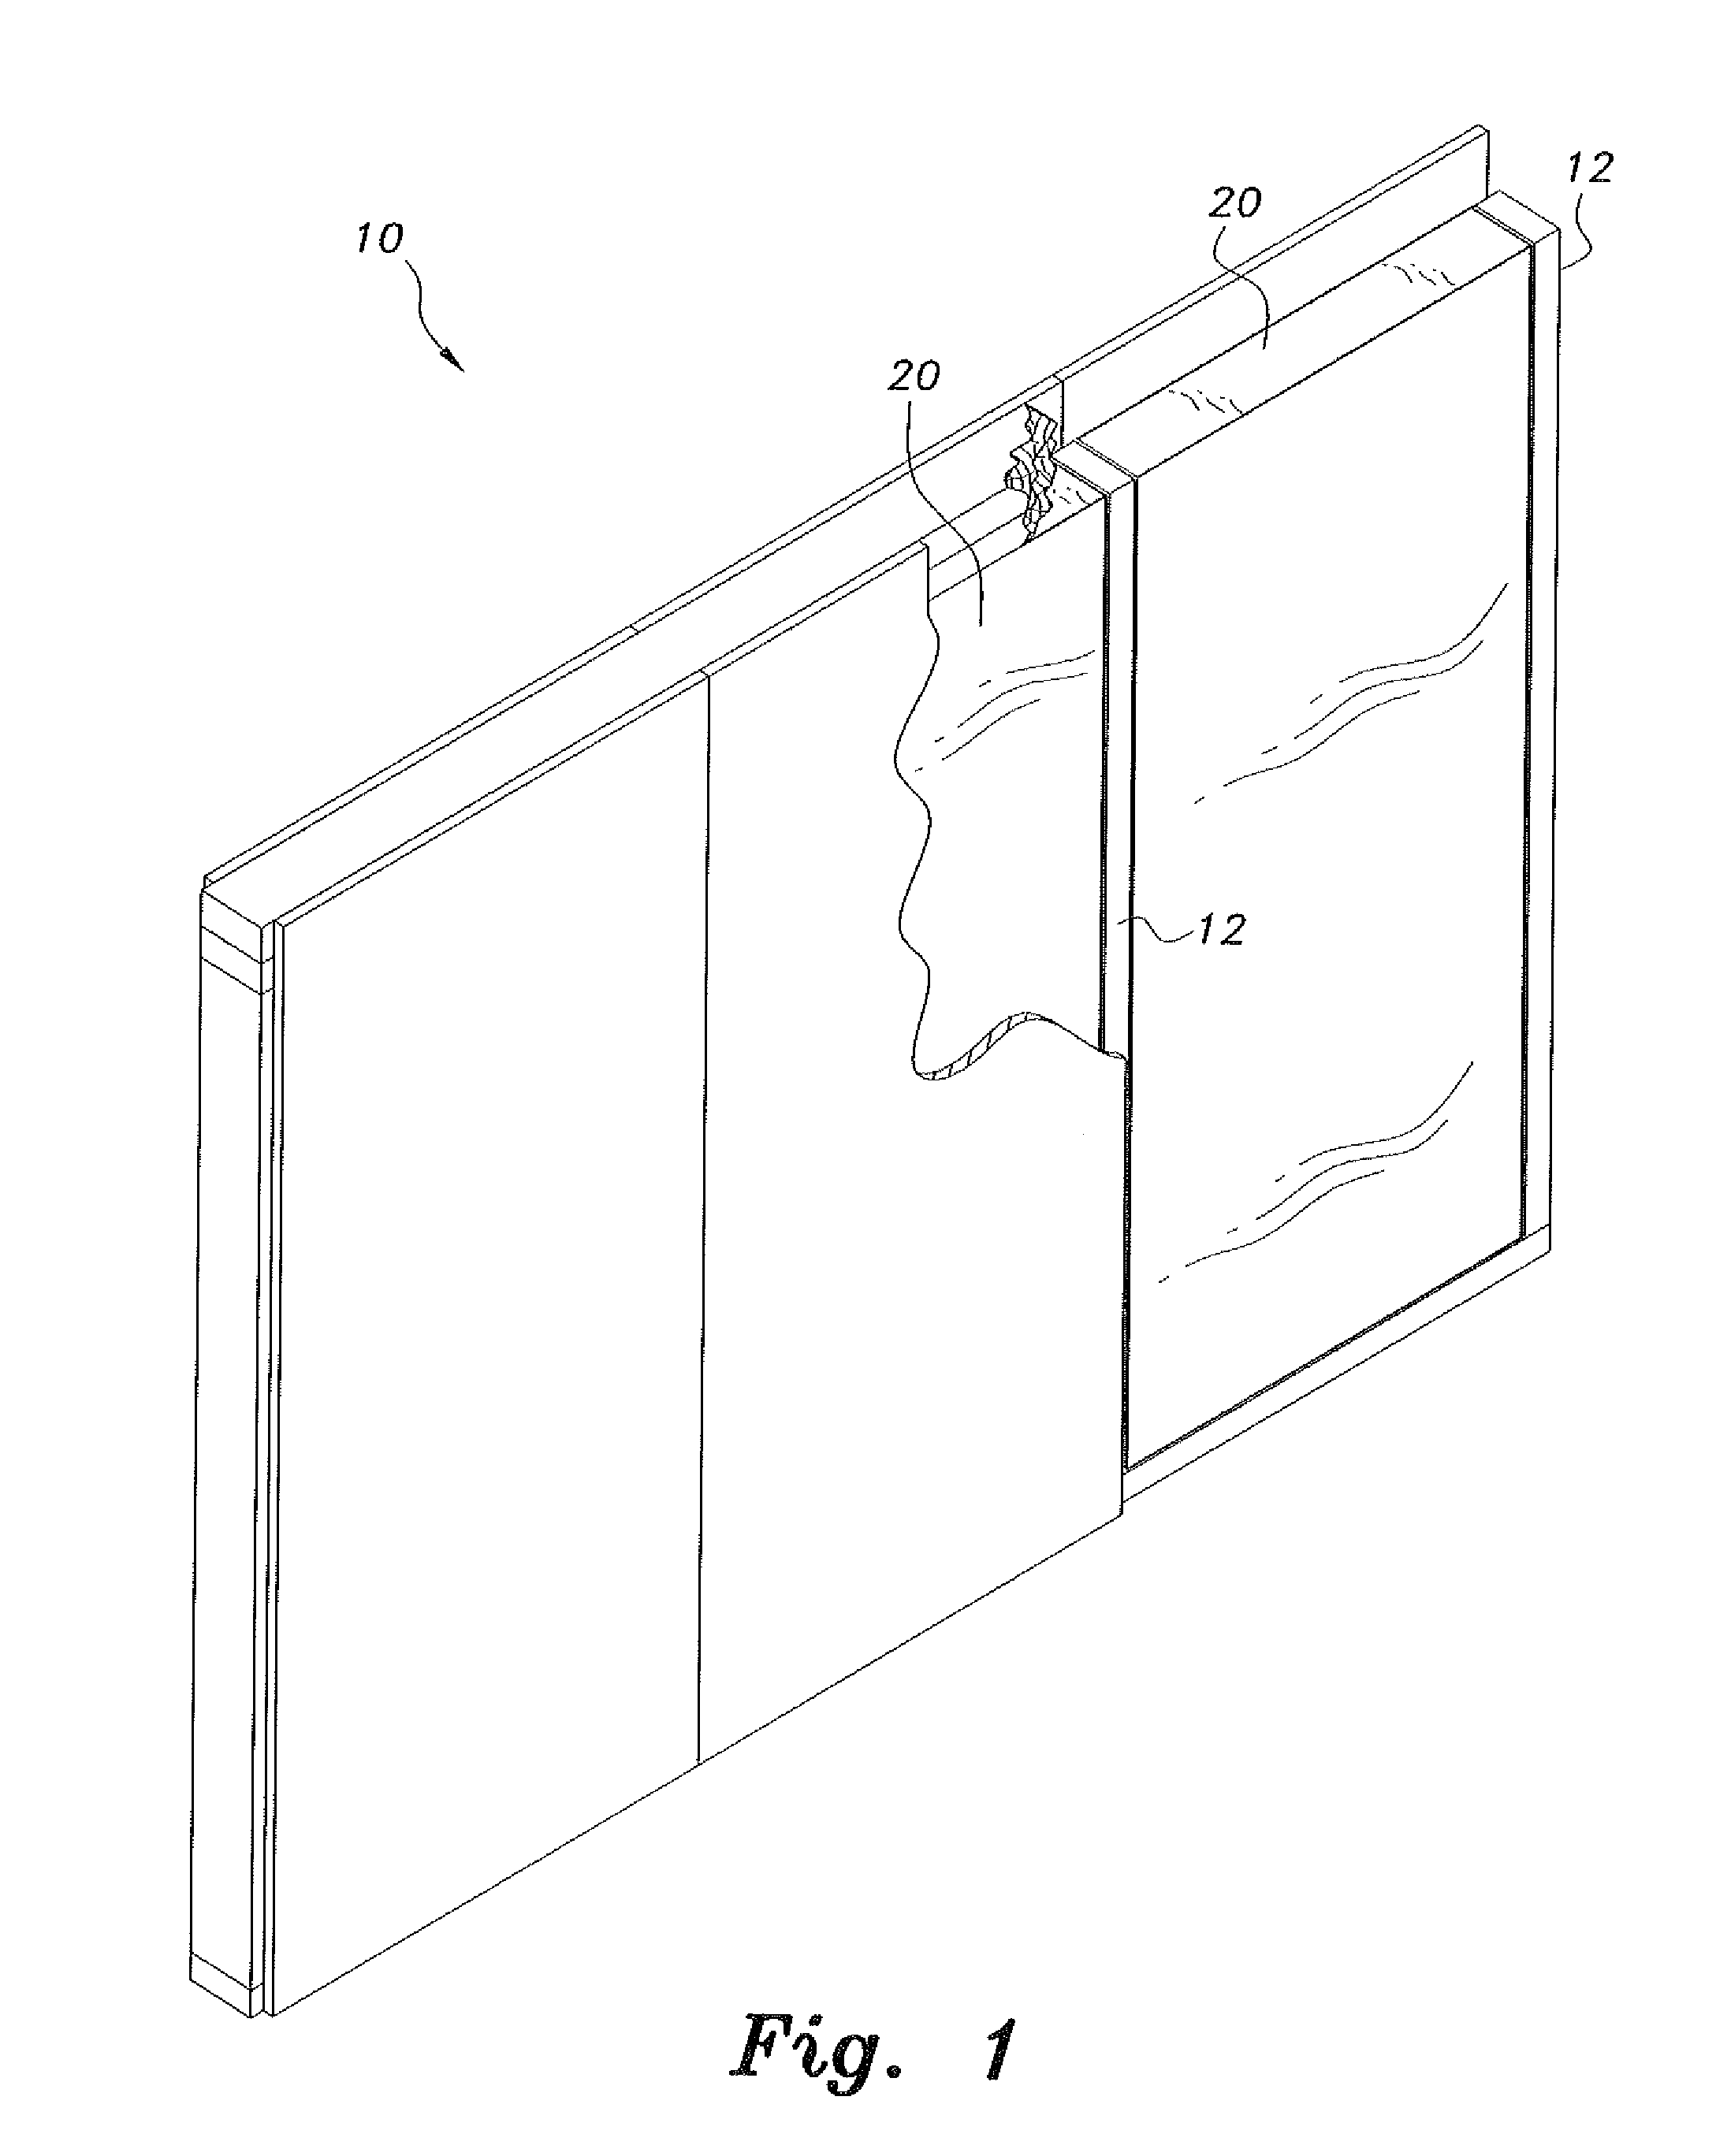 Building insulation system